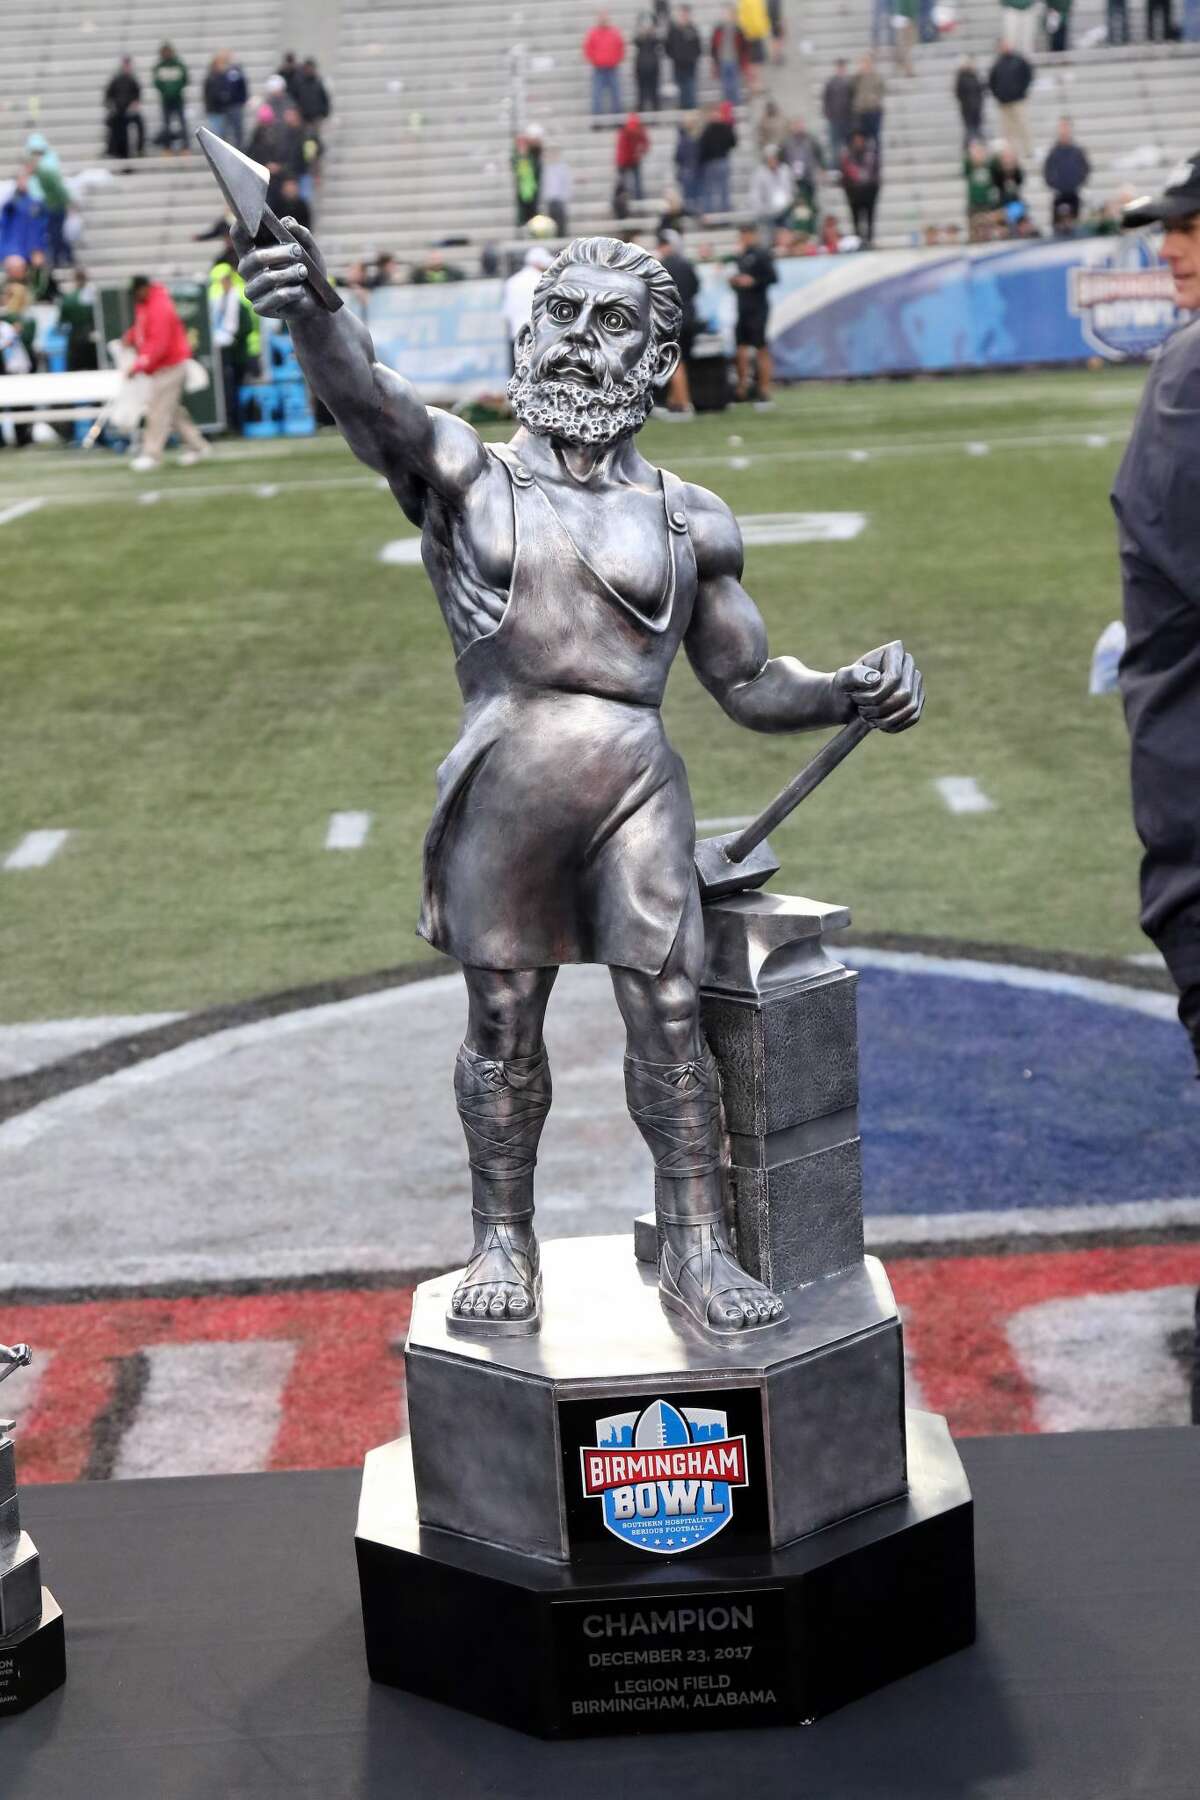 The story behind Houston's Birmingham Bowl trophy unlike any other